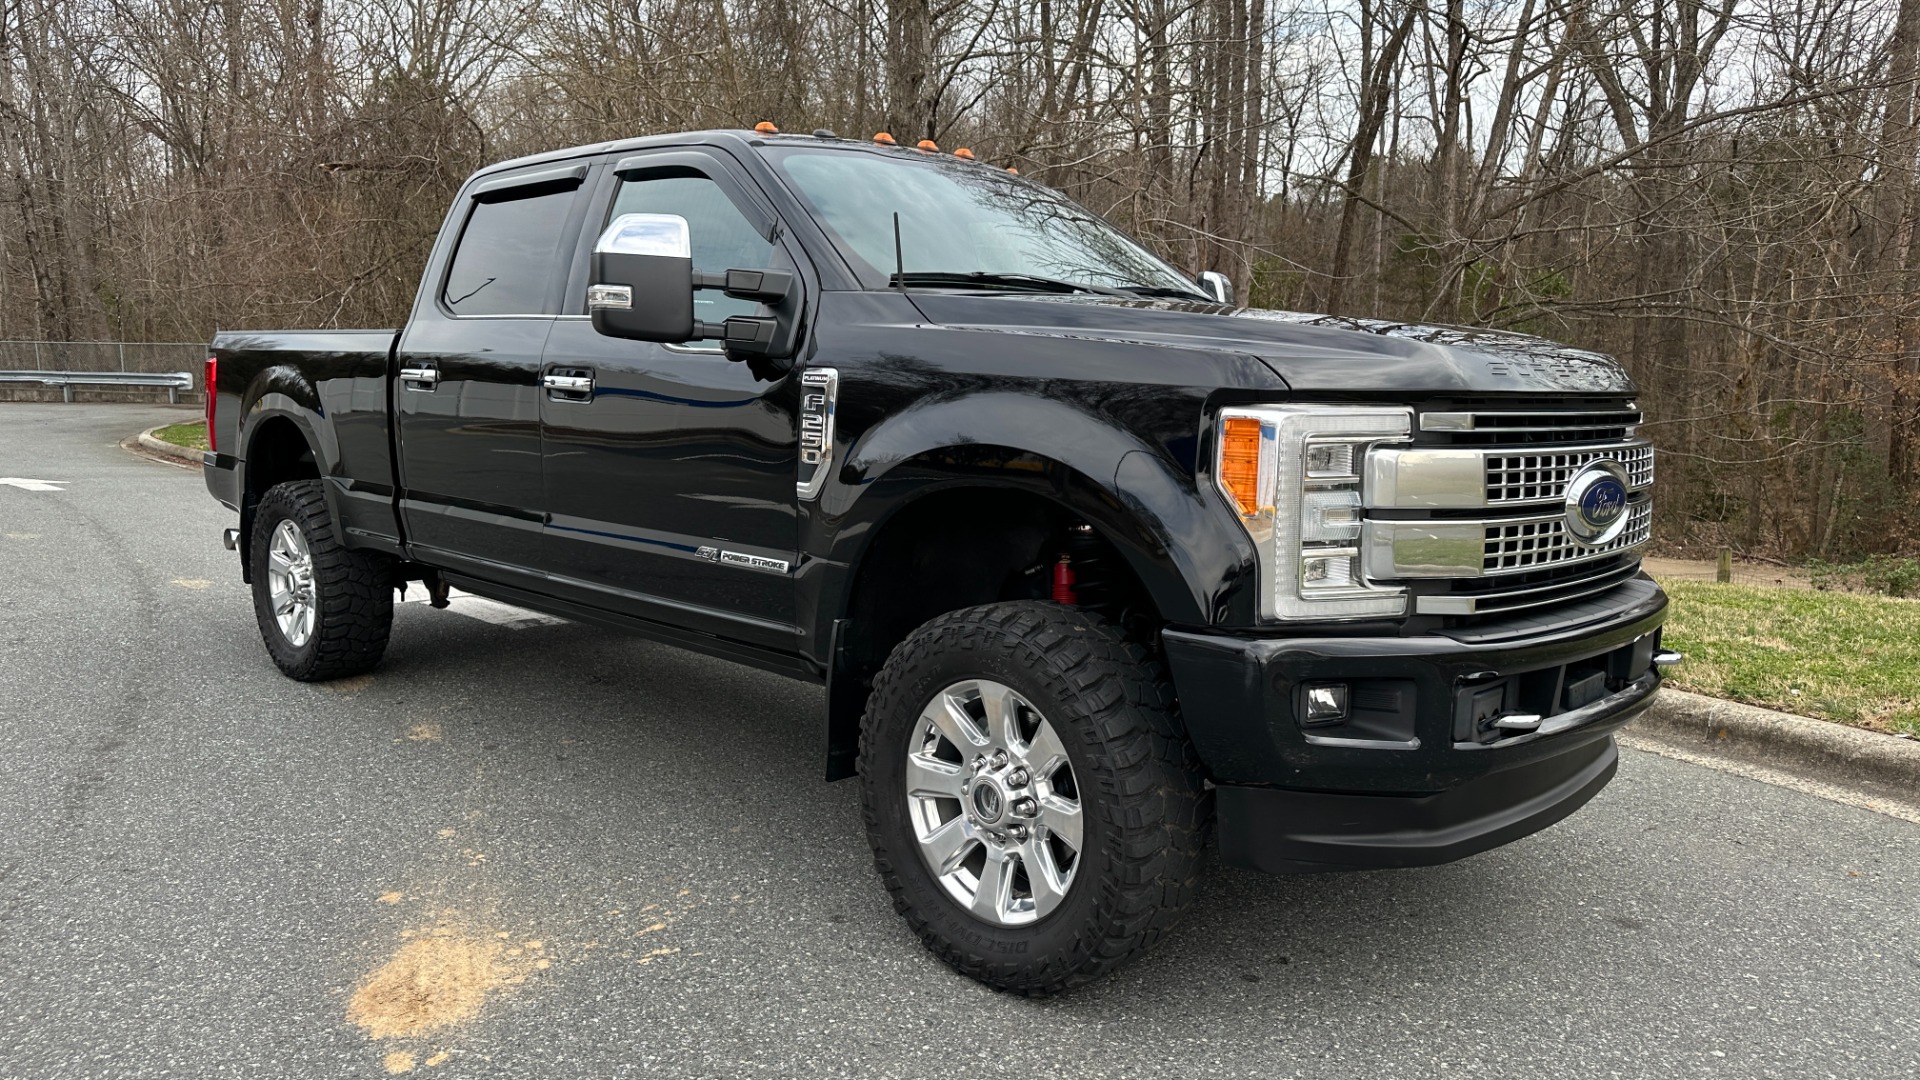 Used 2017 Ford Super Duty F-250 SRW PLATINUM / ULTIMATE PACKAGE / FX4 OFFROAD / 6.7L POWERSTROKE DIESEL for sale Sold at Formula Imports in Charlotte NC 28227 5